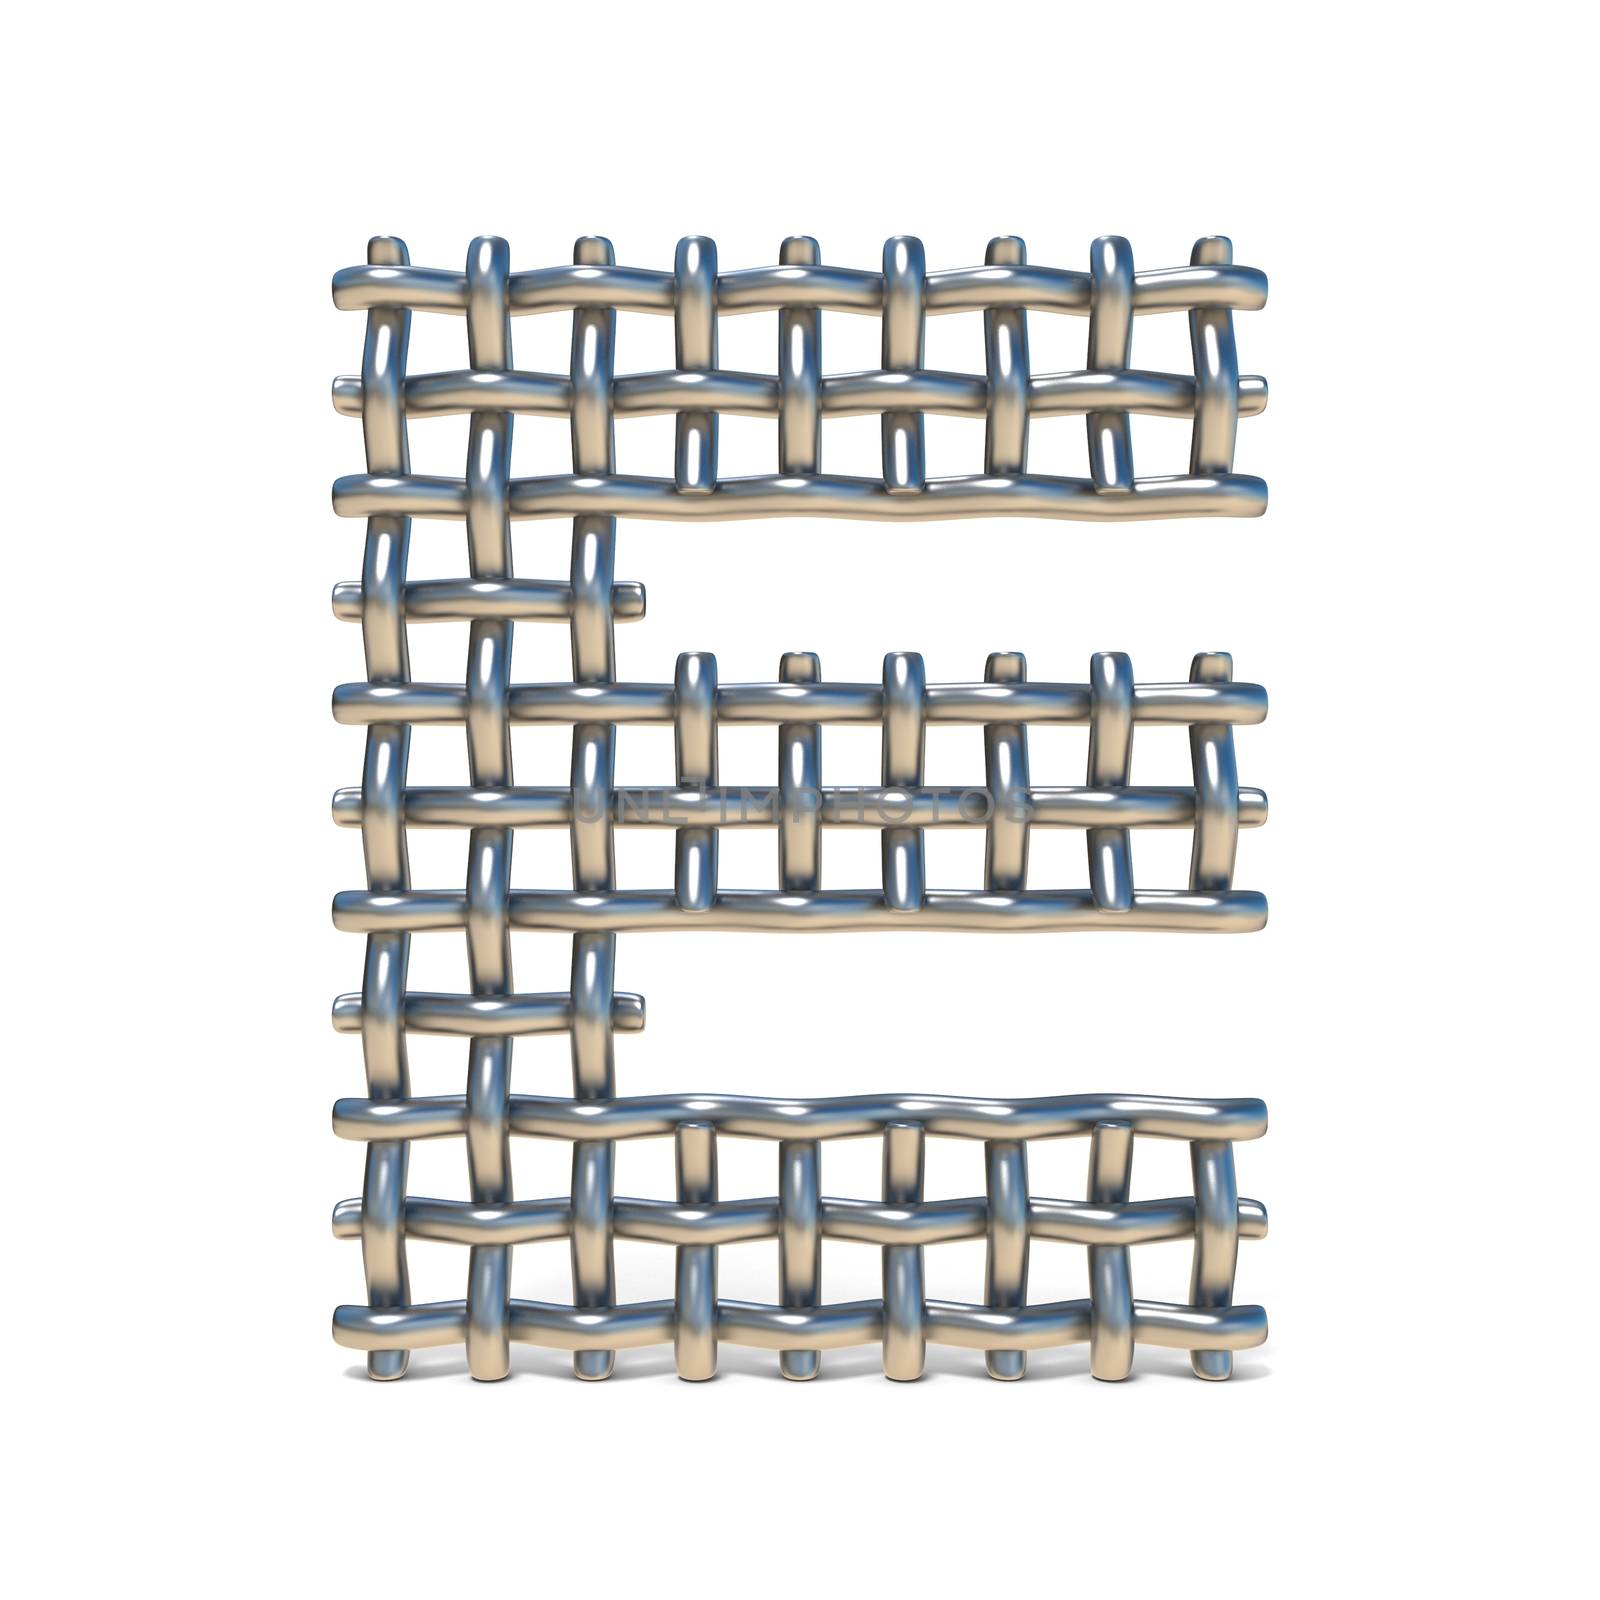 Metal wire mesh font LETTER E 3D render illustration isolated on white background